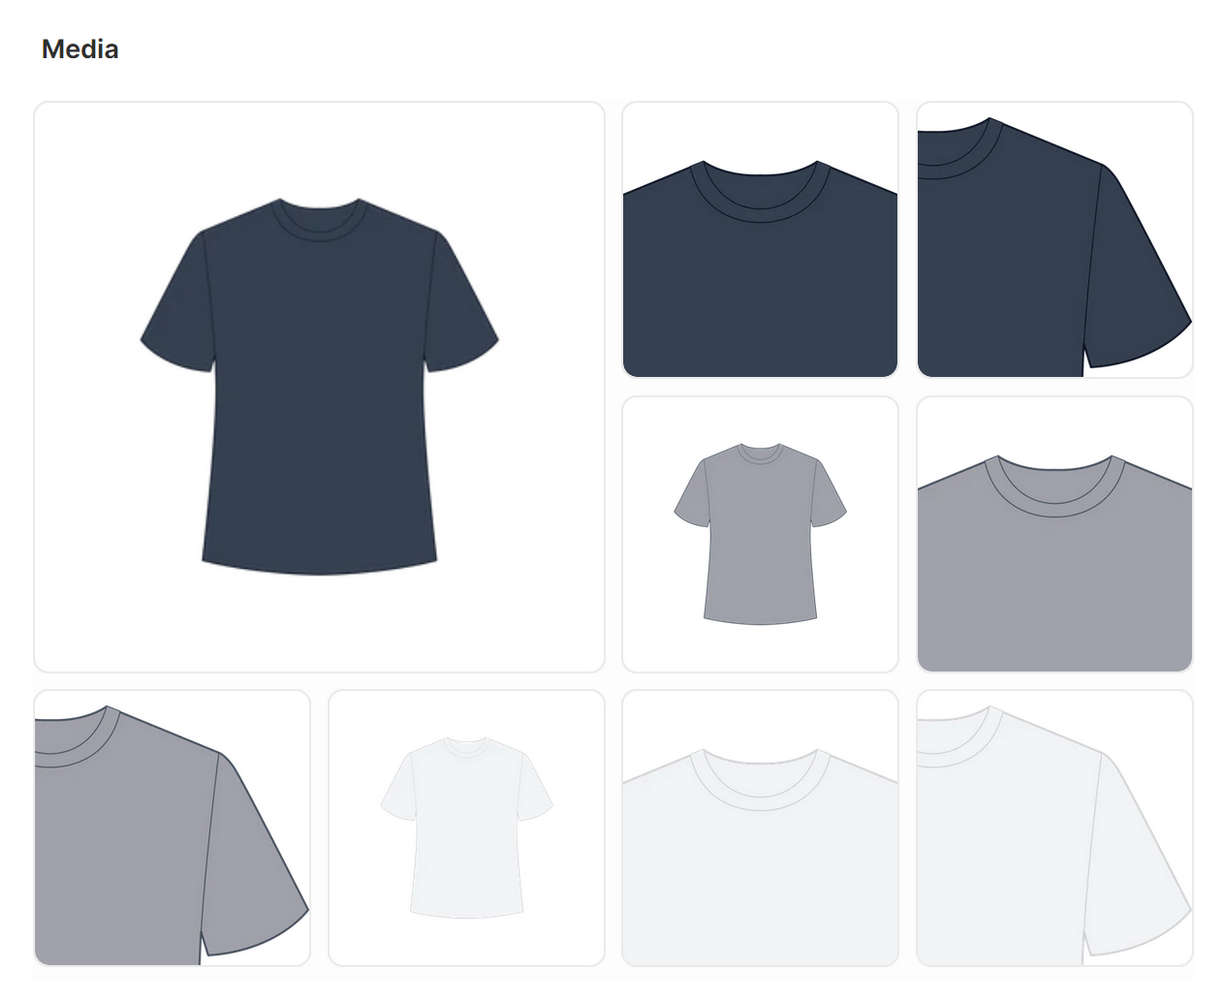 An arrangement of reordered media items in Shopify's Product editor.